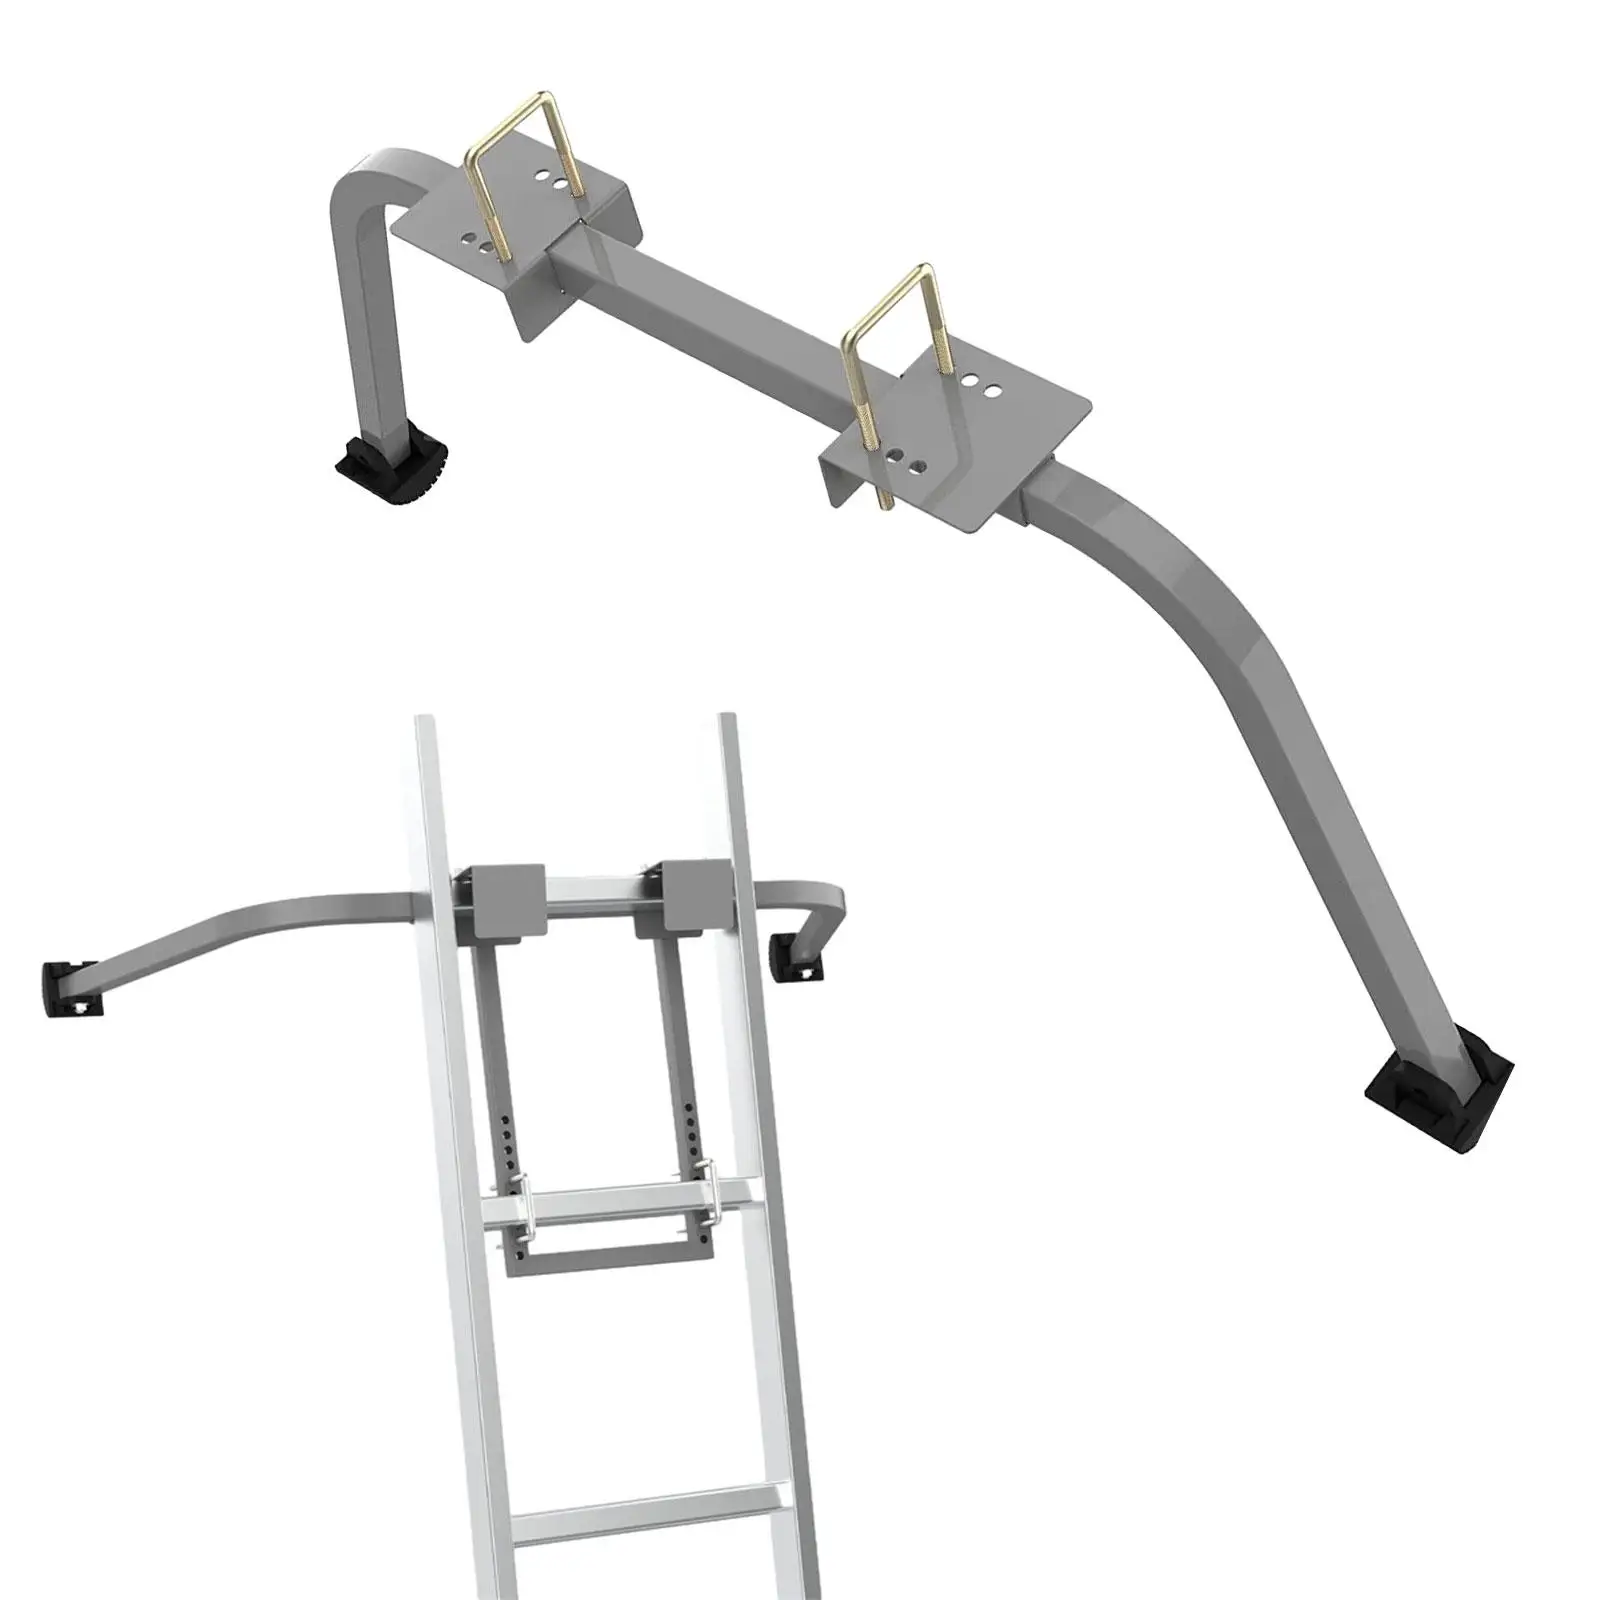 Ladder Stabilizer Accessory Ladder Spare Parts Straight Ladder Stabilizer for Wall Outdoor Repair Projects Roof Ladders Gutter